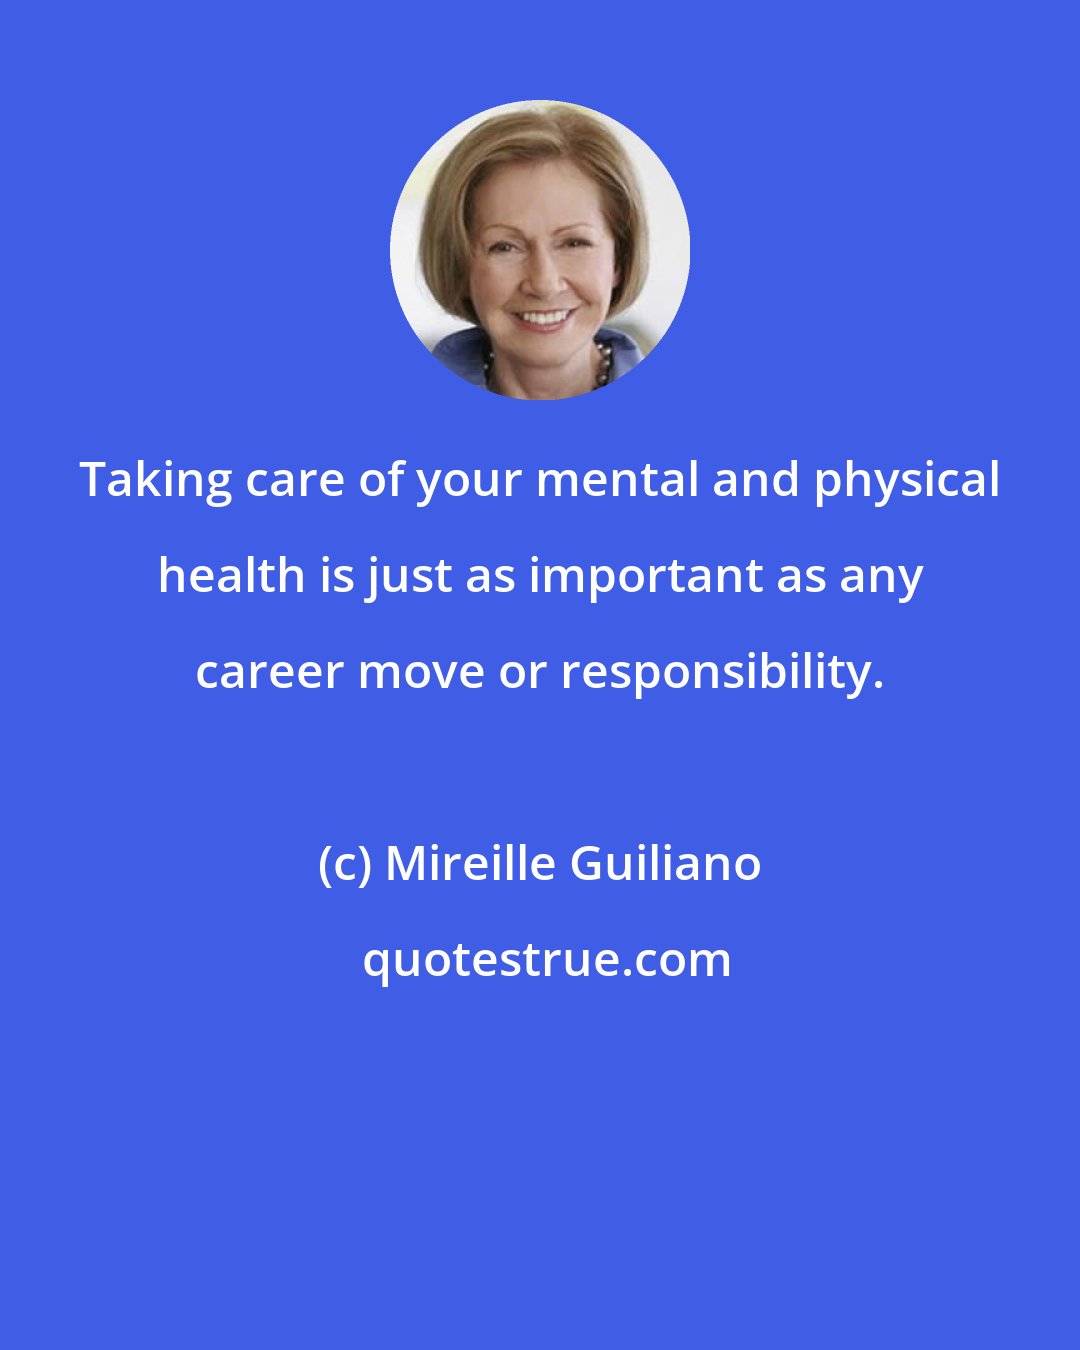 Mireille Guiliano: Taking care of your mental and physical health is just as important as any career move or responsibility.